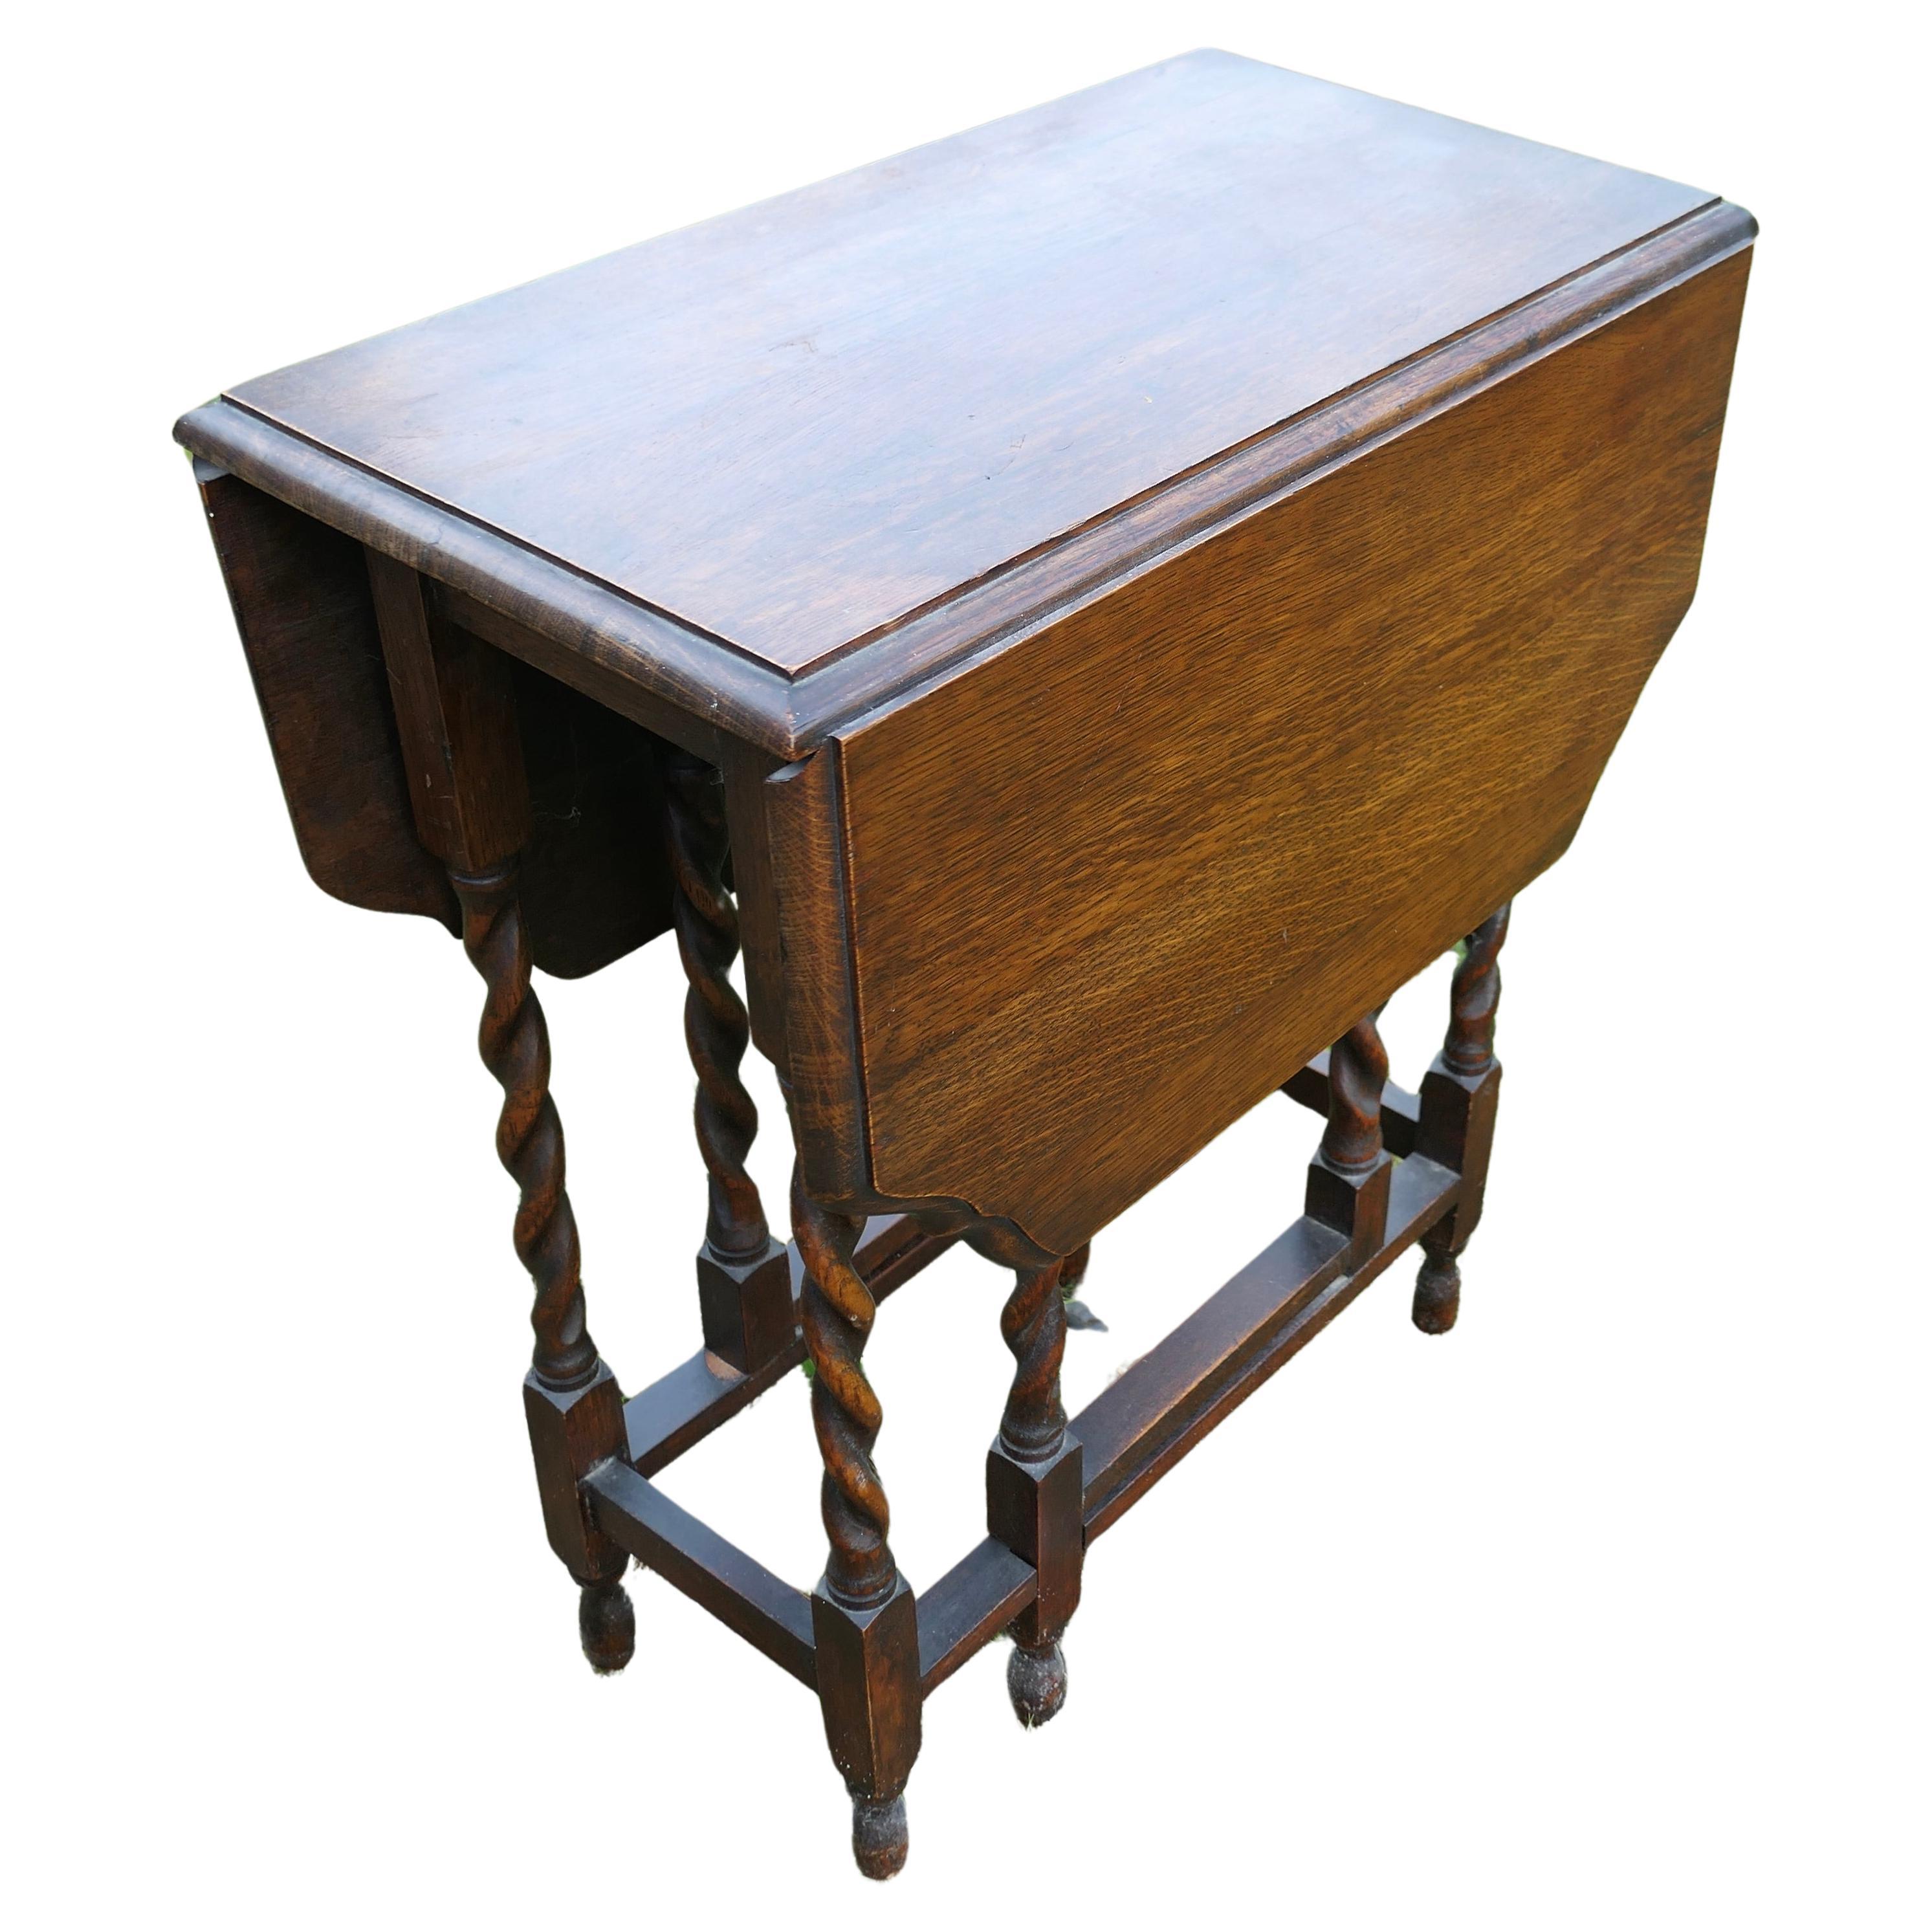 A Good Solid Oak Victorian Gate Leg Table   The table is made from solid Oak  